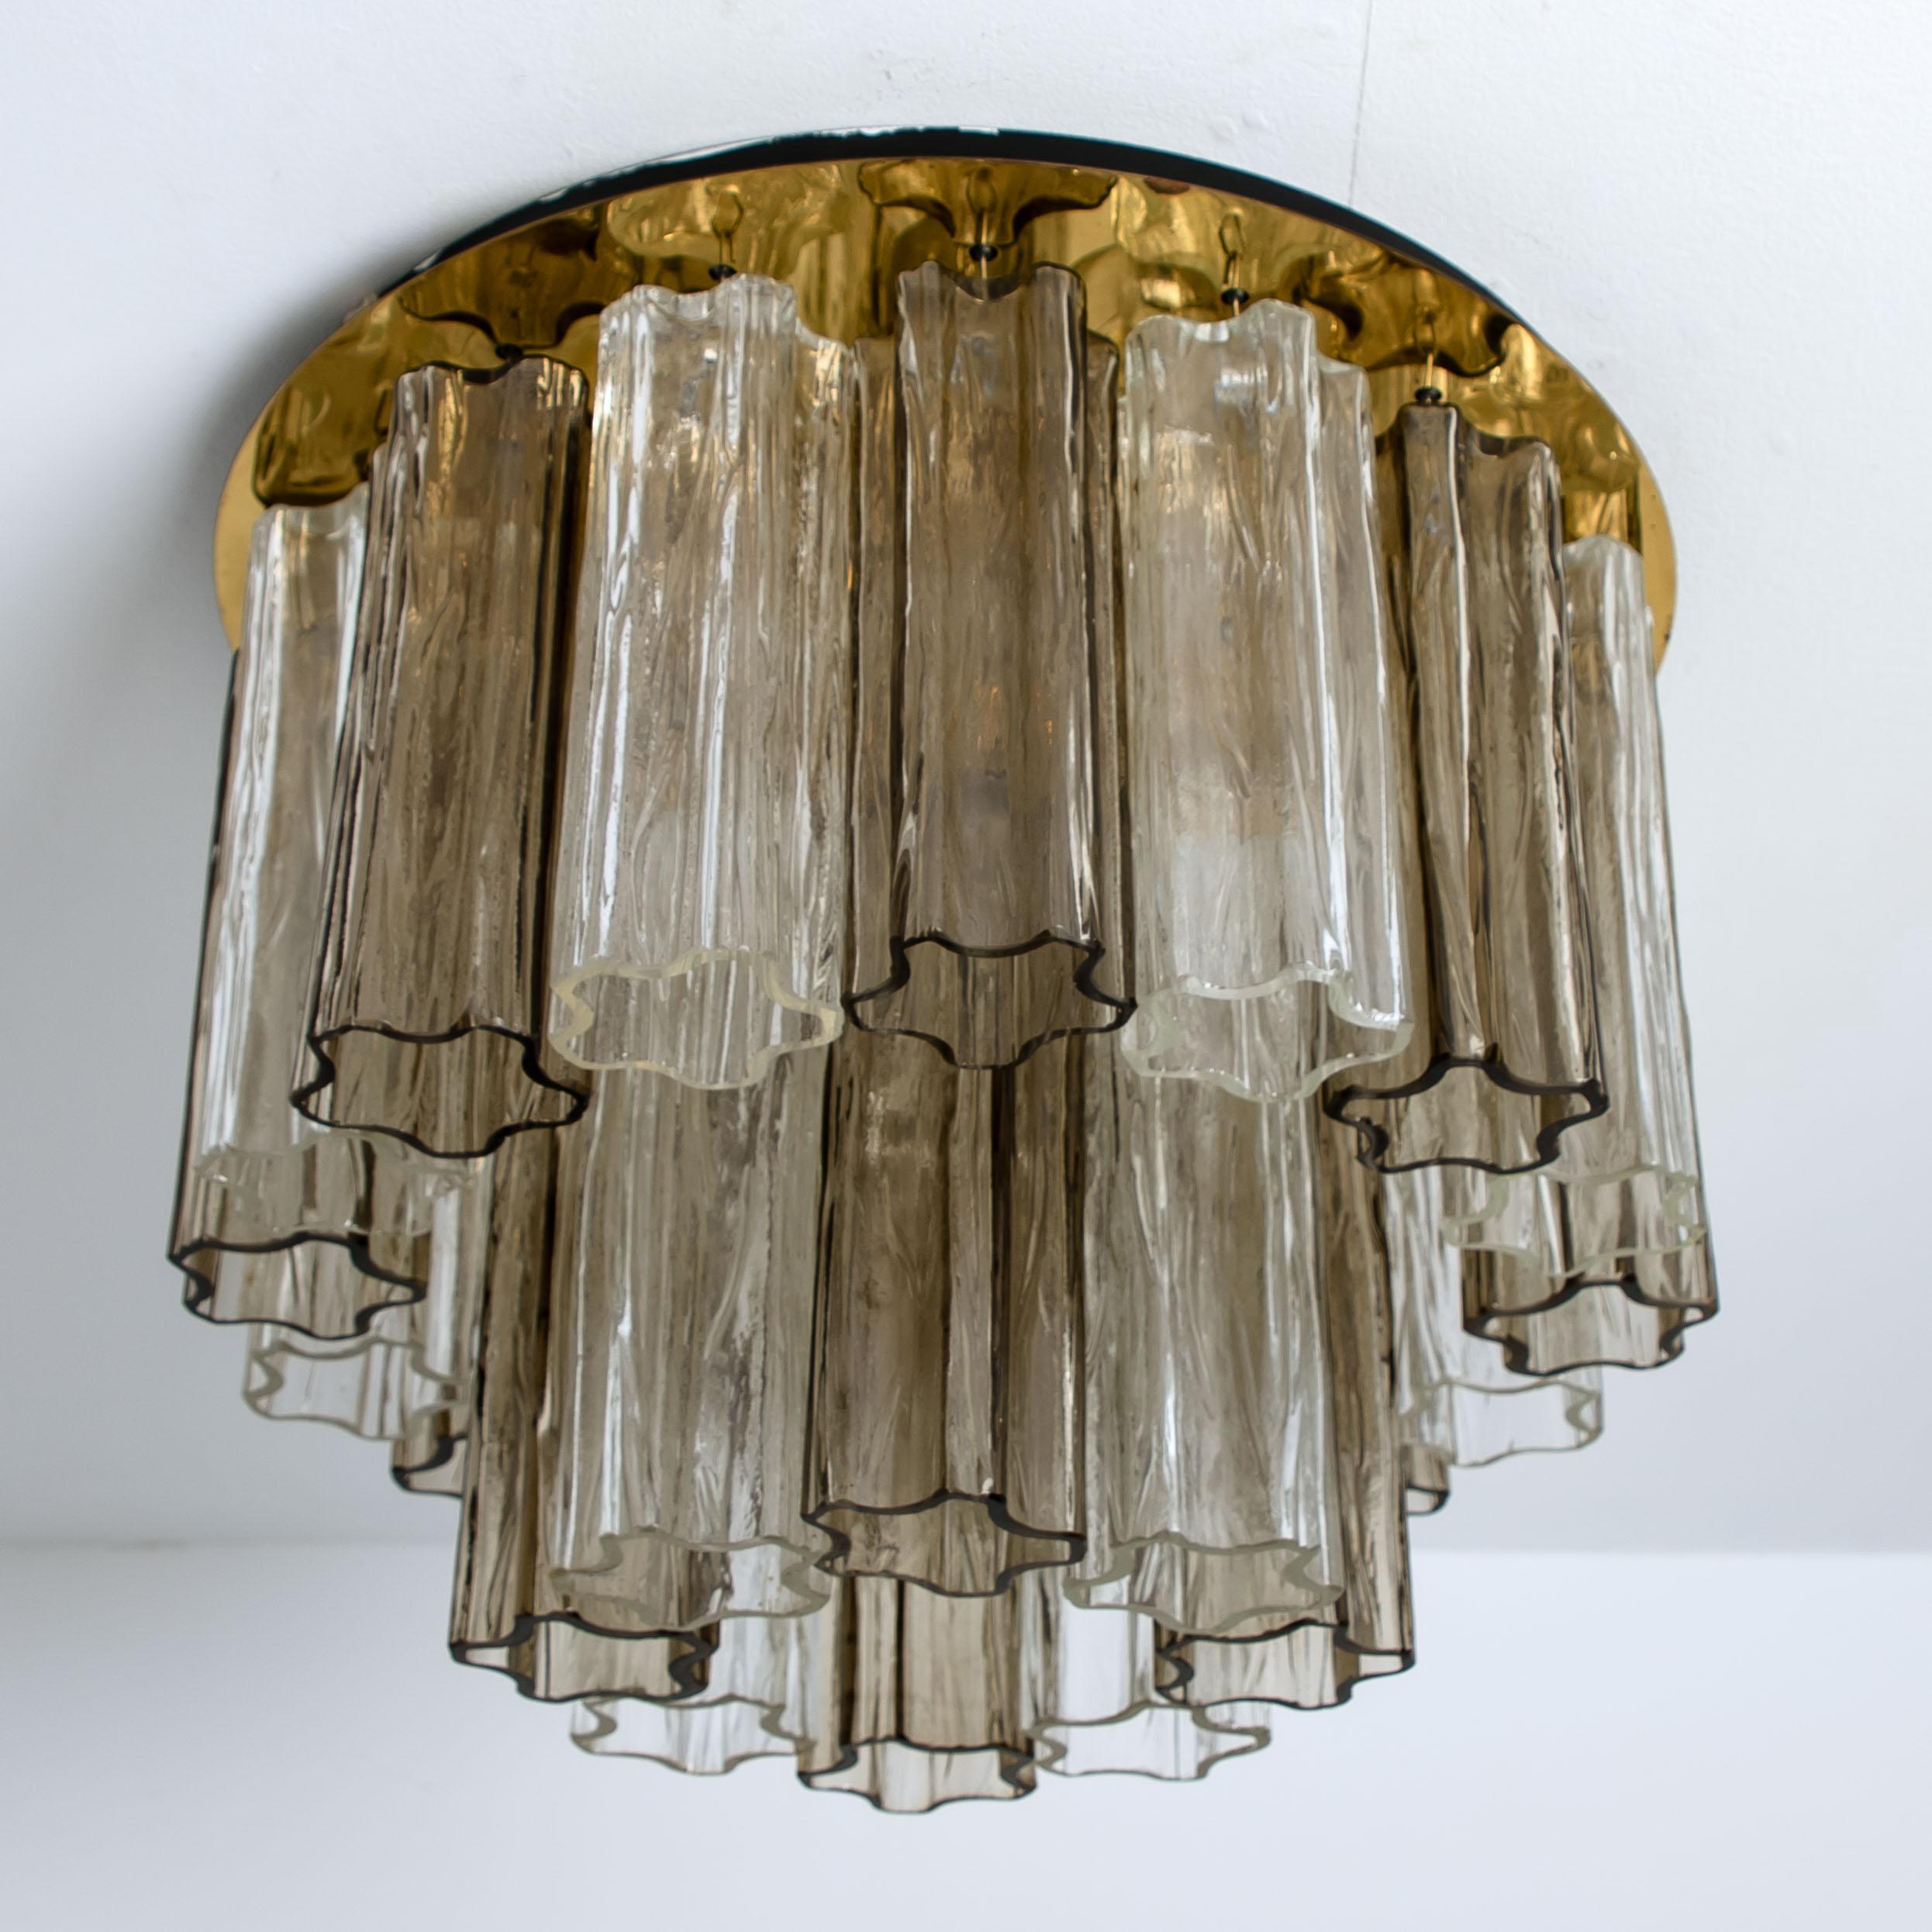 A wonderful set of Murano glass tronchi flushmount light fixtures designed by J.T. Kalmar for Kalmar Franken, Vienna, Austria. Manufactured in circa 1960. These set is handmade. A high quality set of the 20th century.
Murano tubes in smoked and